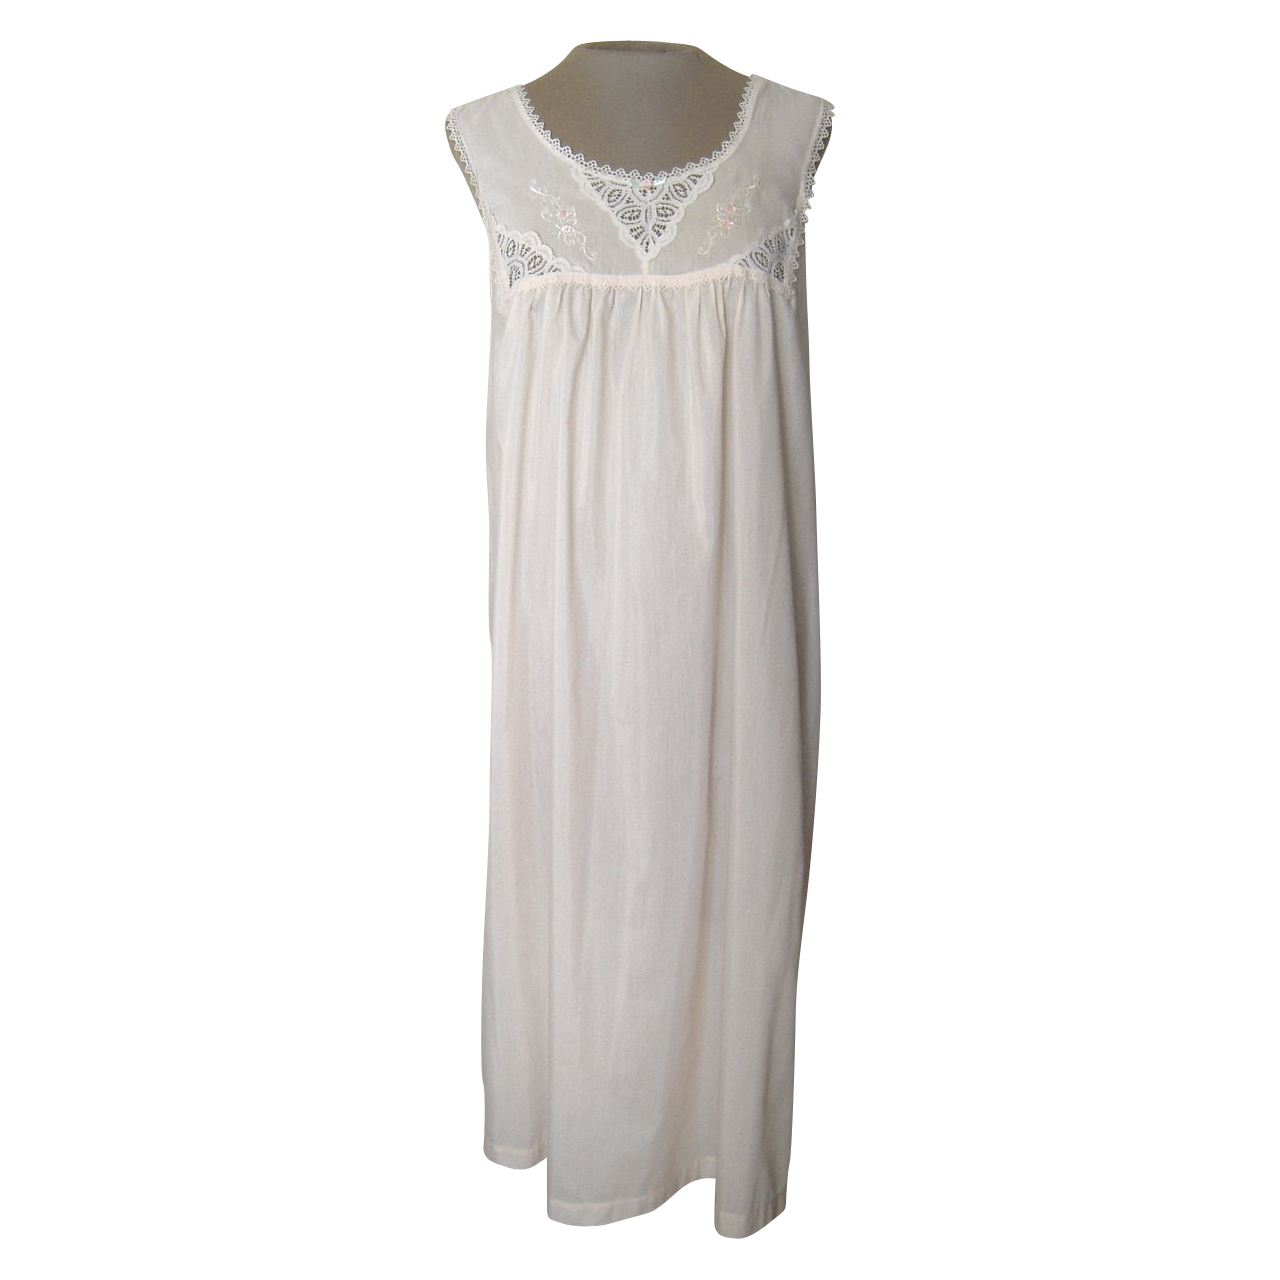 Vintage Vanity Fair Matching Nightgown and Robe from beca on Ruby Lane